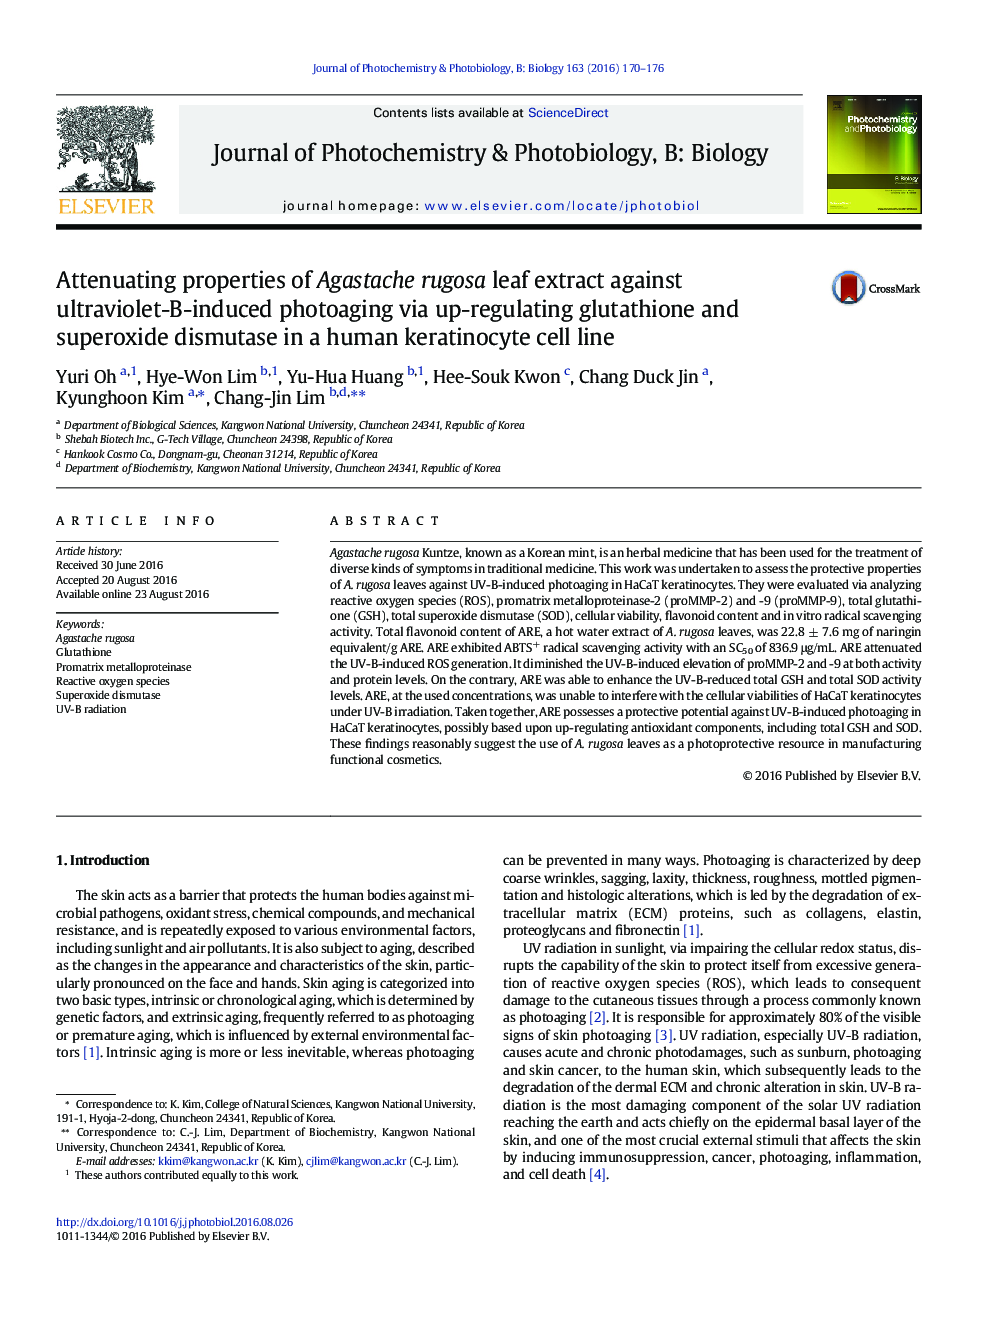 Attenuating properties of Agastache rugosa leaf extract against ultraviolet-B-induced photoaging via up-regulating glutathione and superoxide dismutase in a human keratinocyte cell line